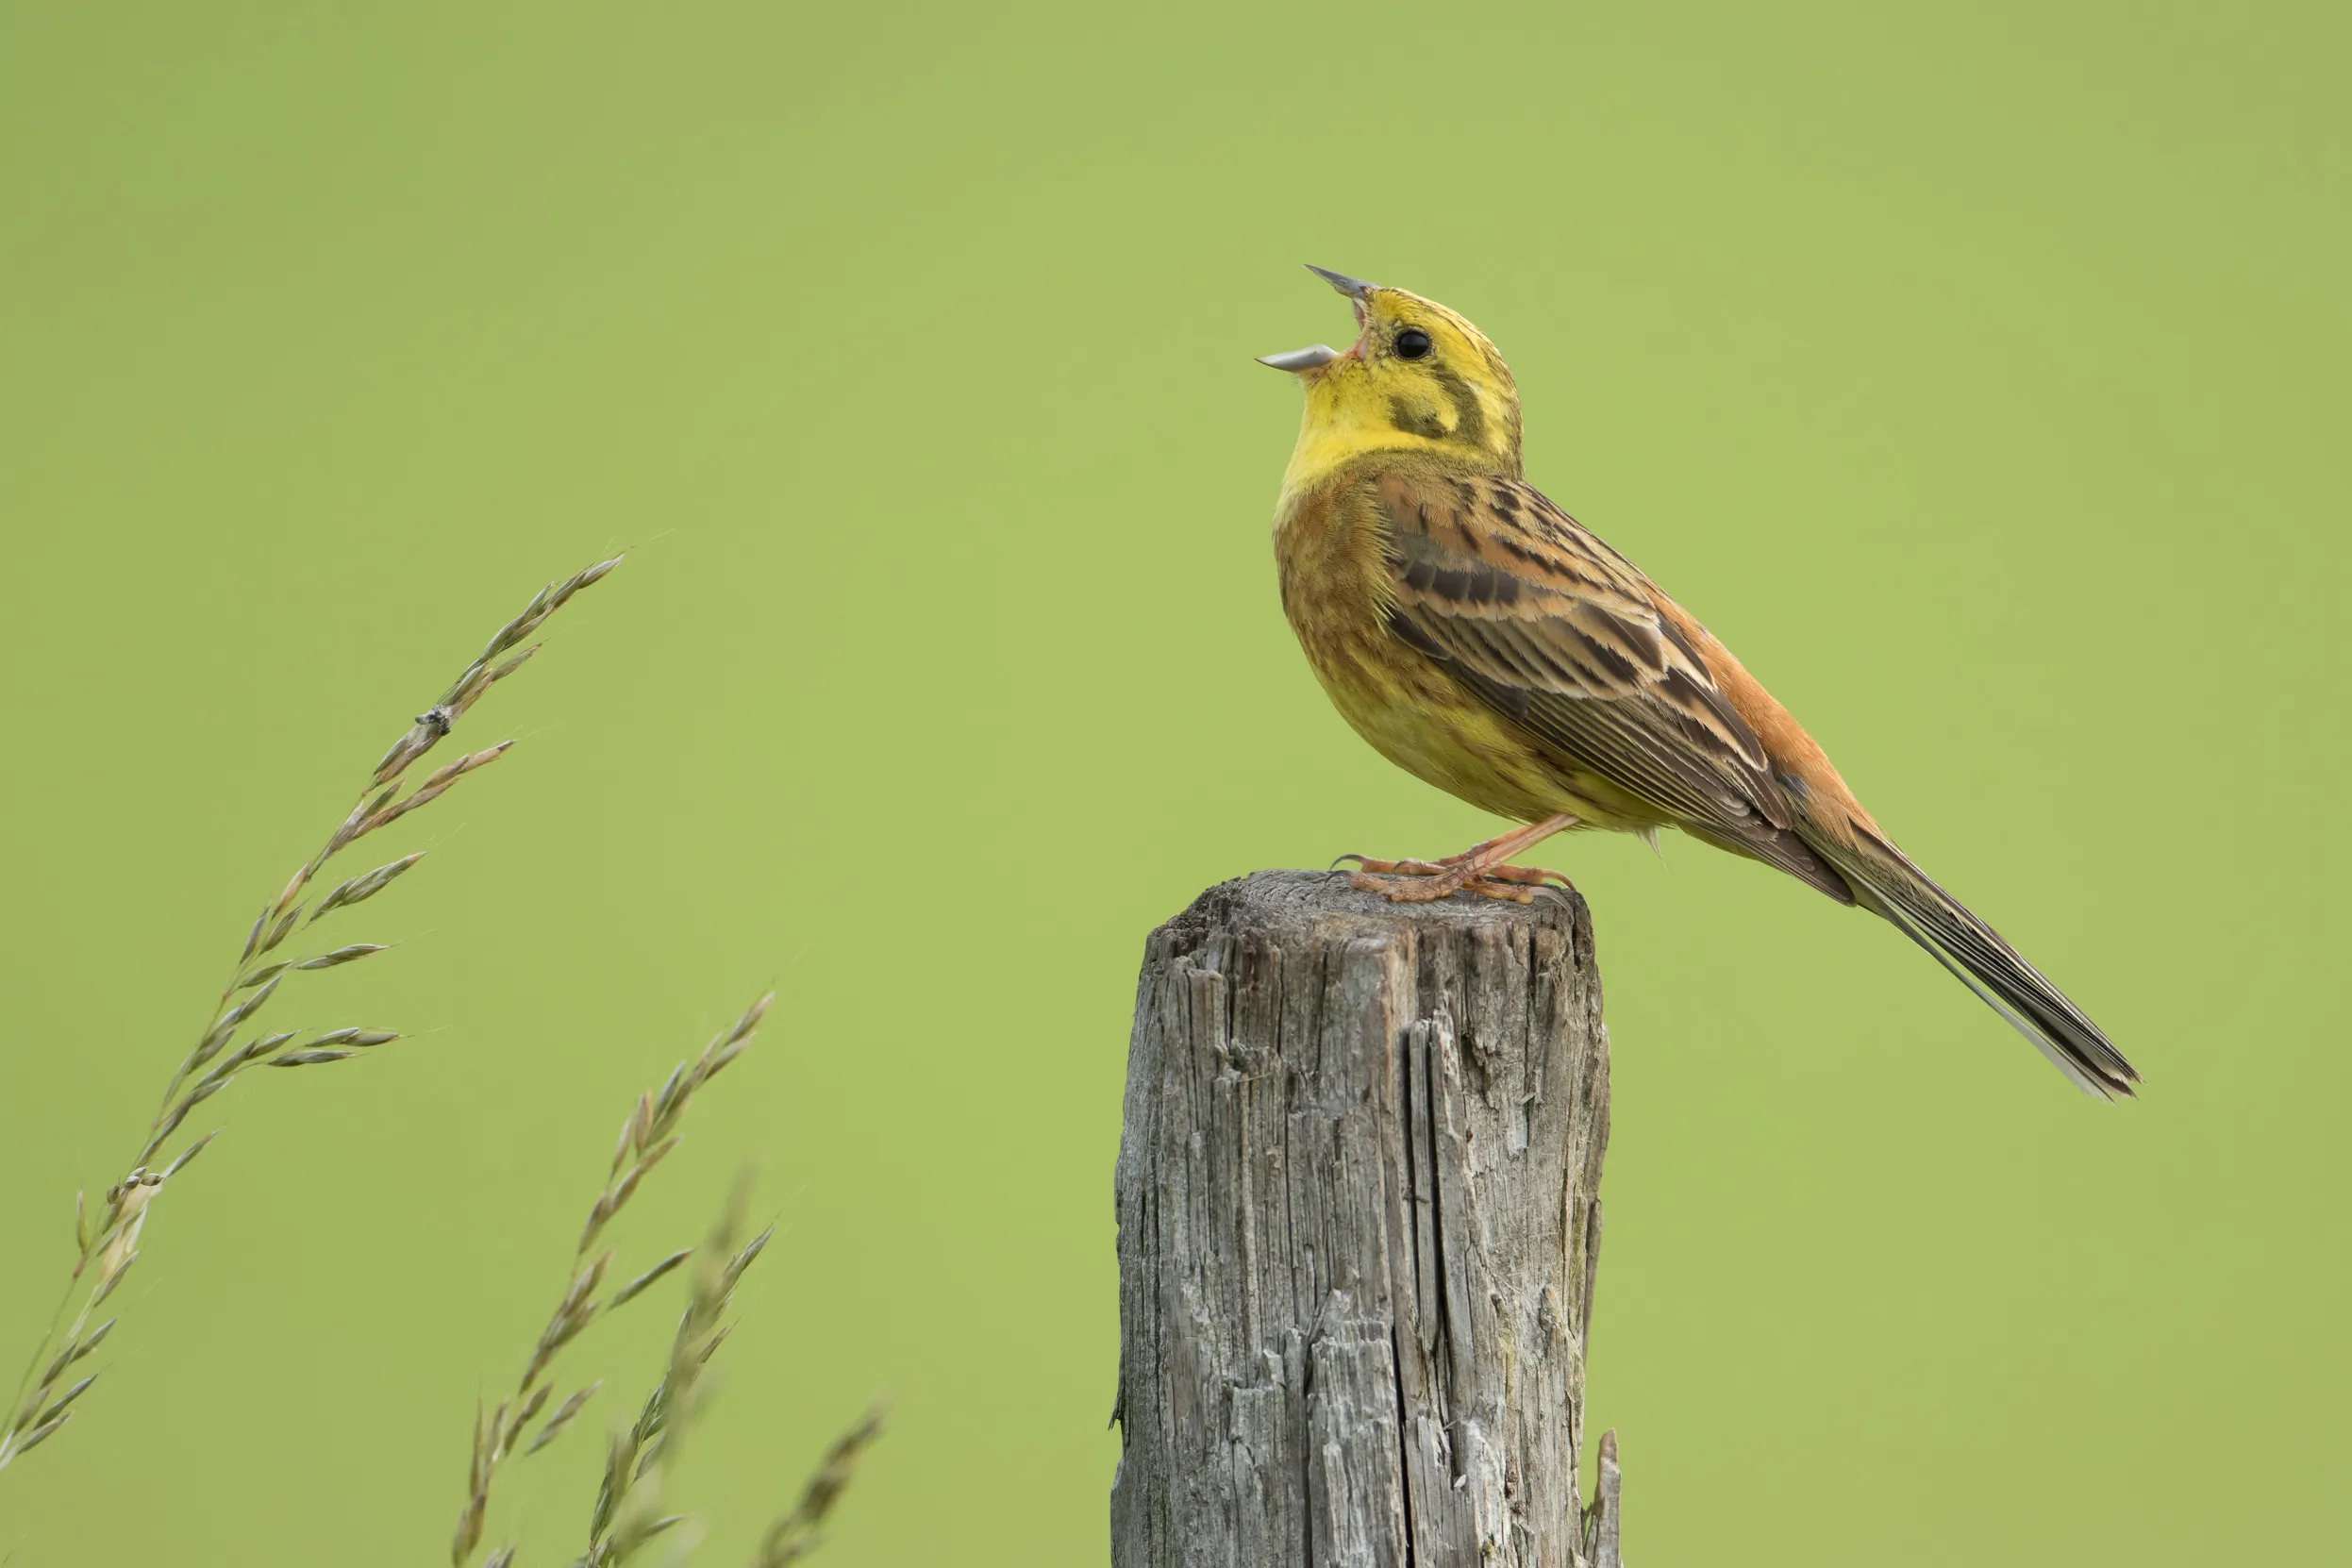 A male Yellowhammer perched on a fence post.